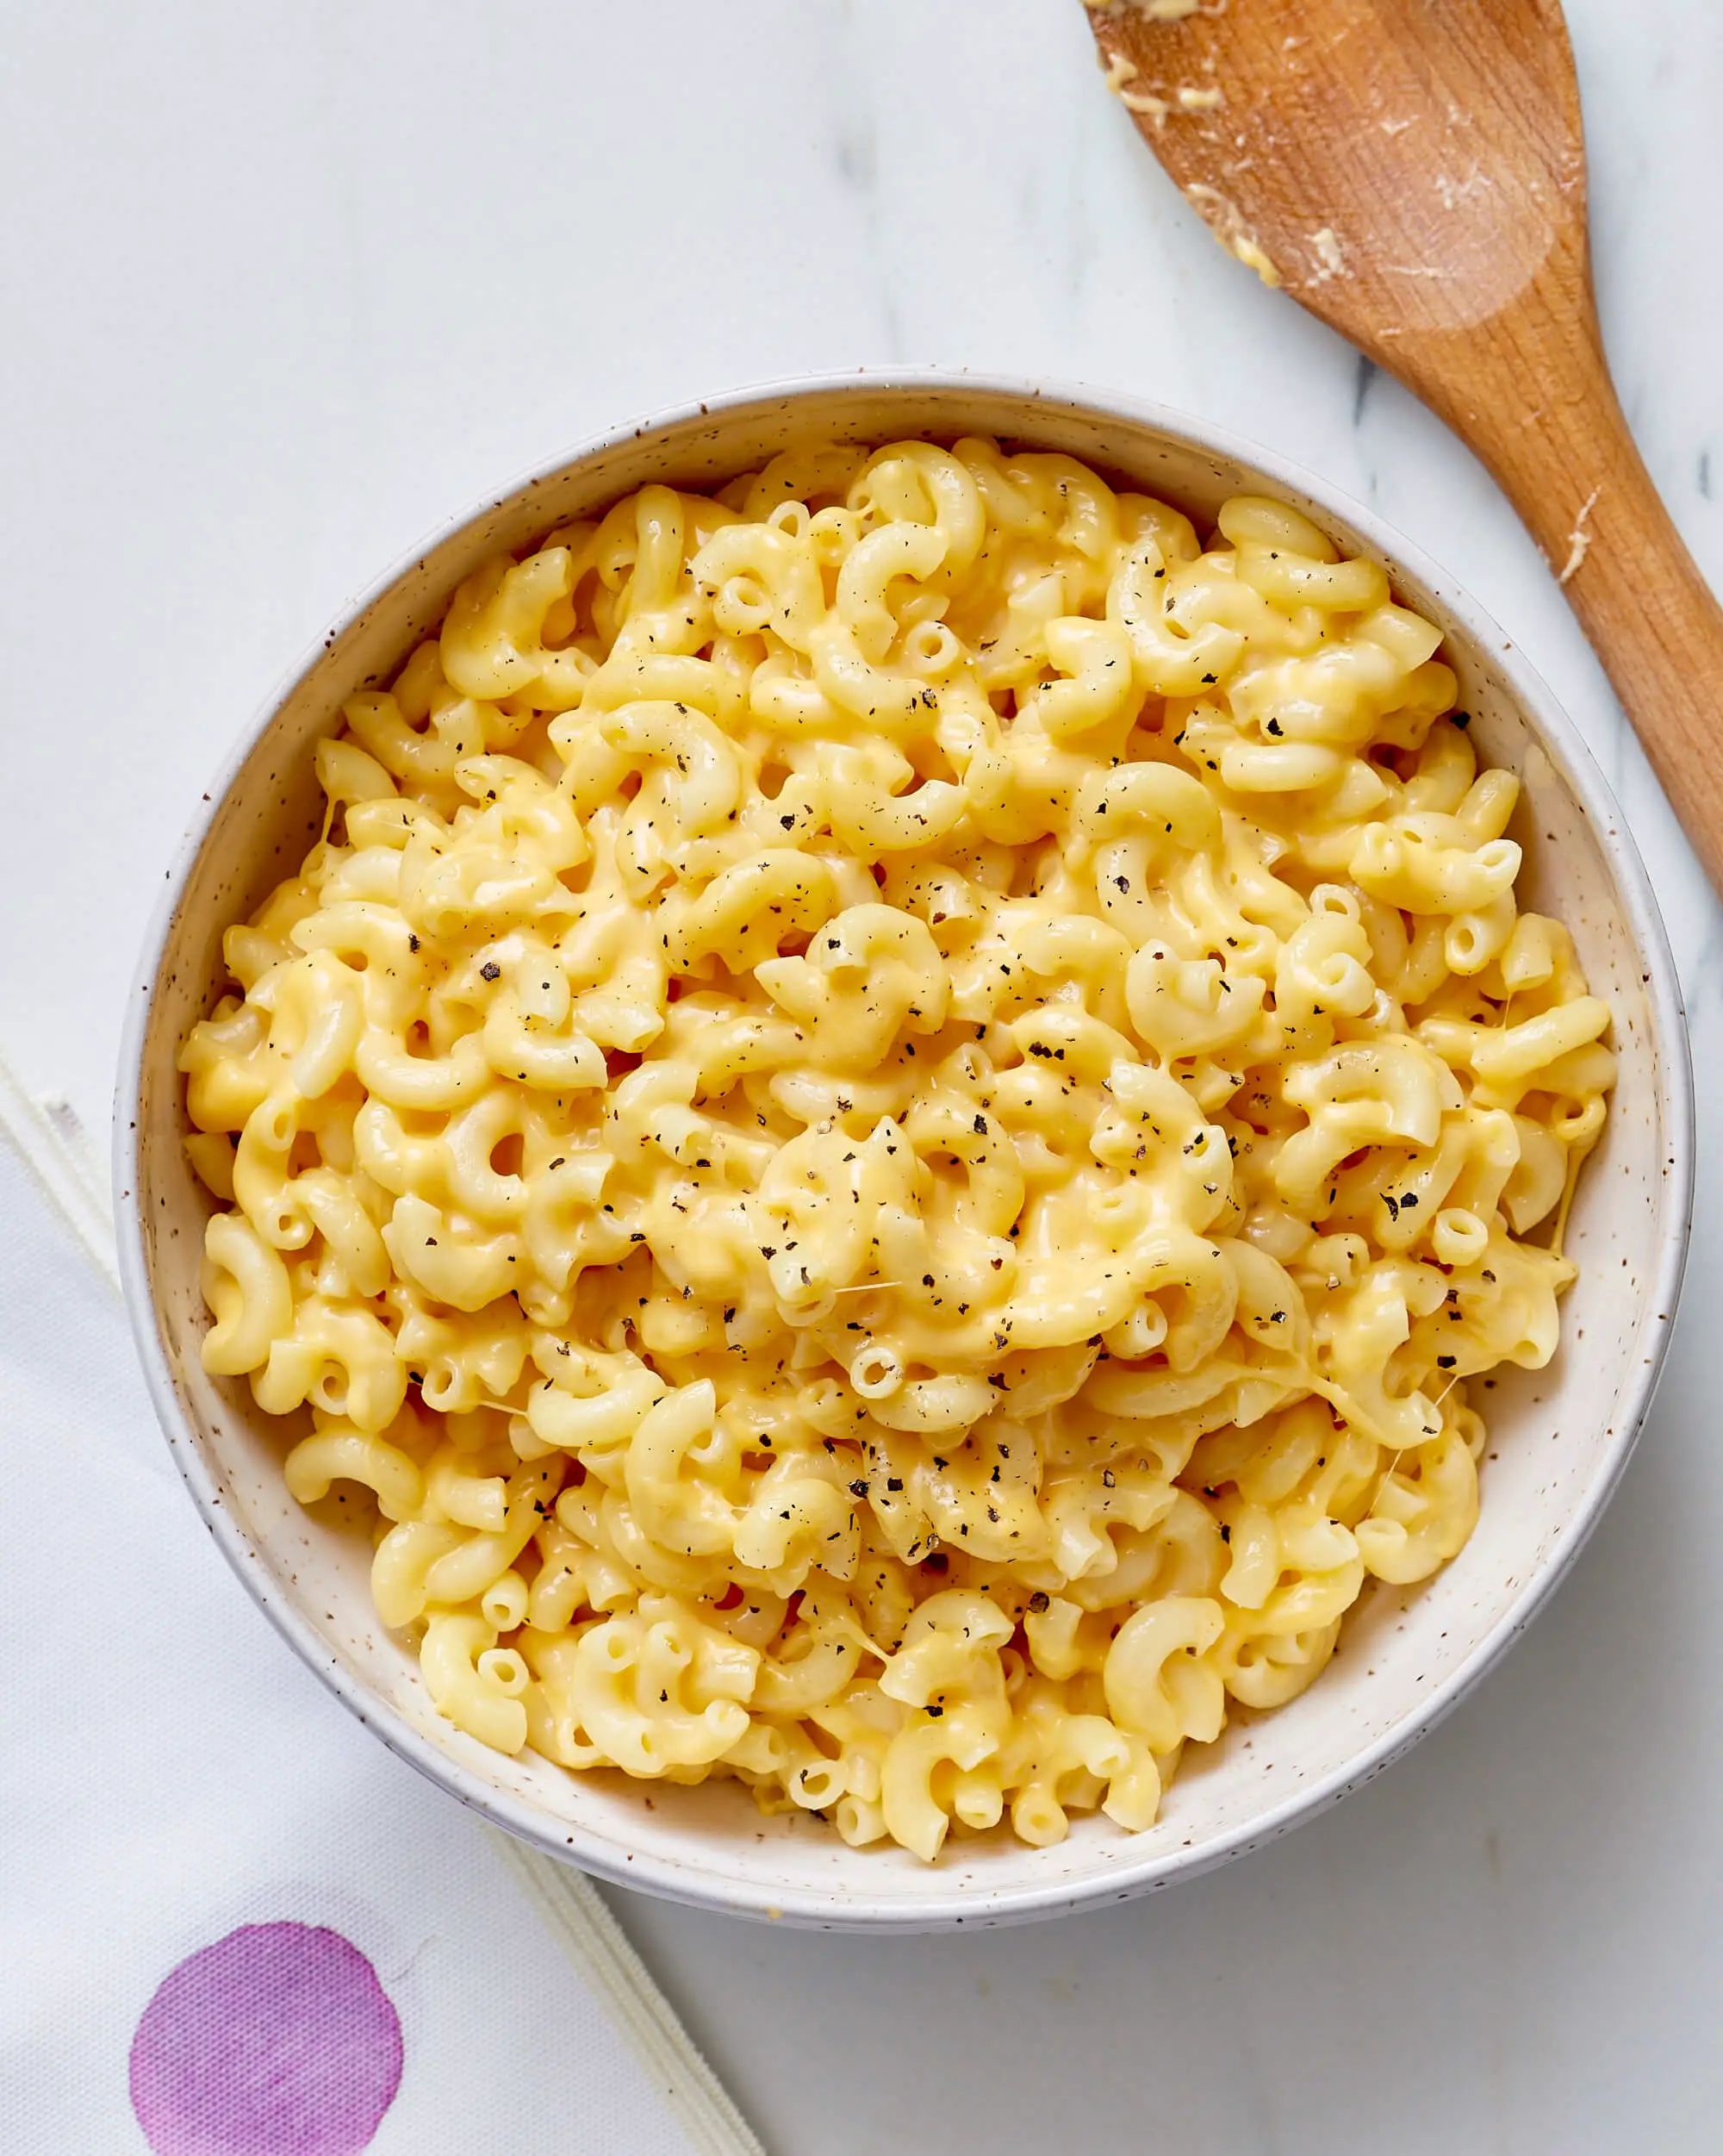 What Can You Substitute for Milk in Mac and Cheese